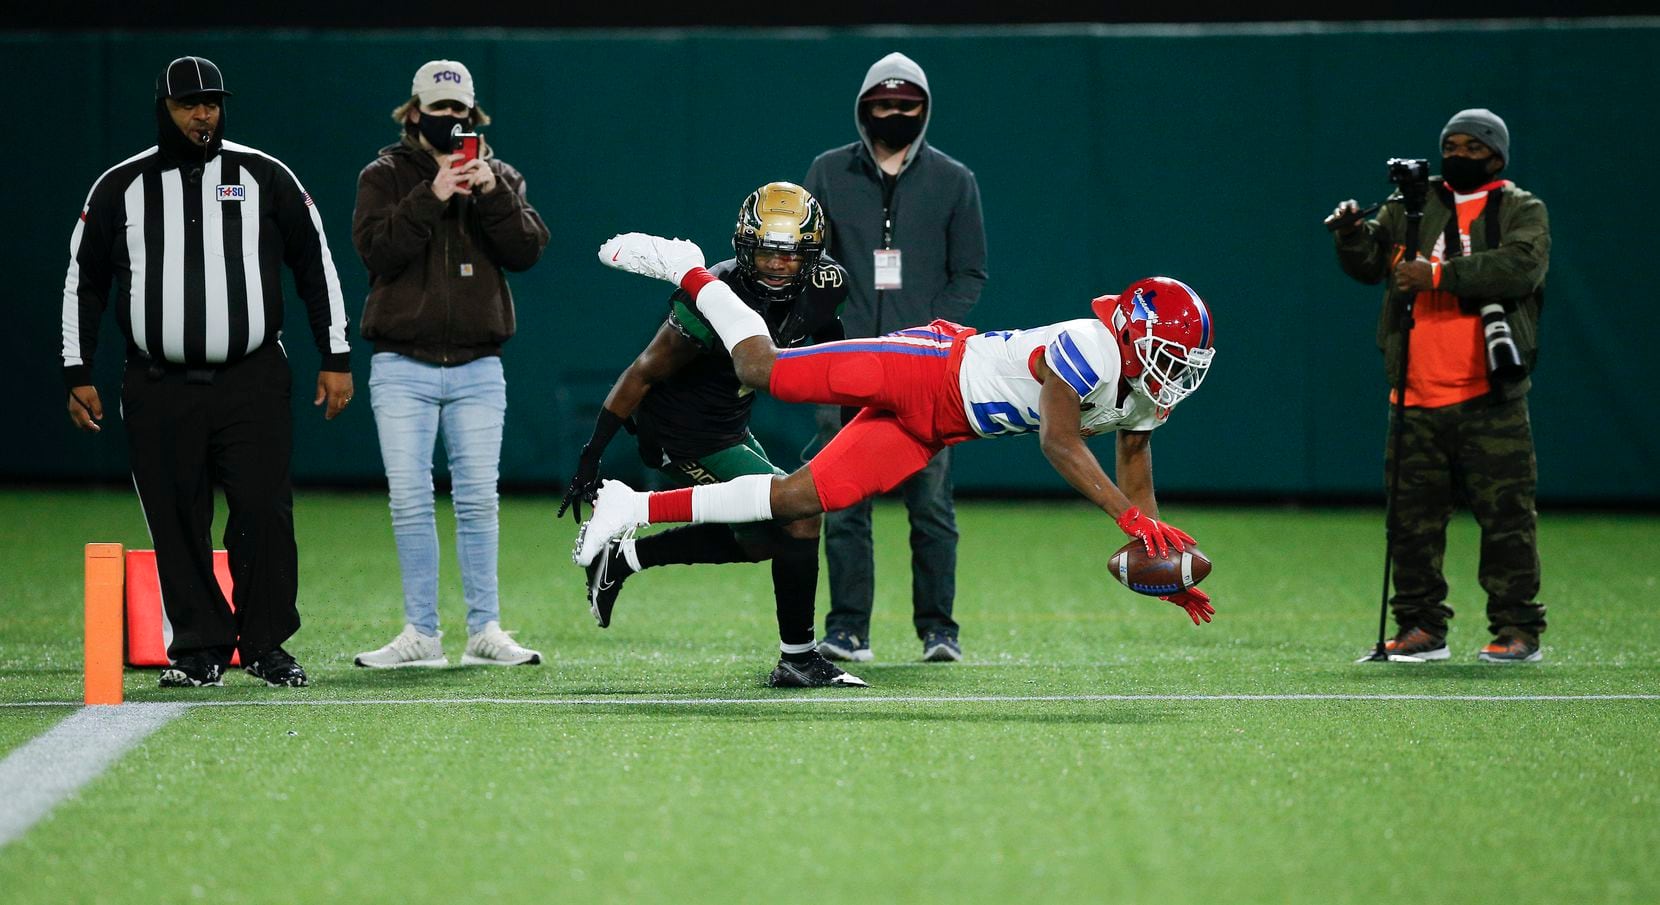 Duncanville sophomore wide receiver Lontrell Turner (22) scores a touchdown as DeSoto junior safety Devyn Bobby (3) defends during the first half of a Class 6A Division I Region II final high school football game, Saturday, January 2, 2021. (Brandon Wade/Special Contributor)